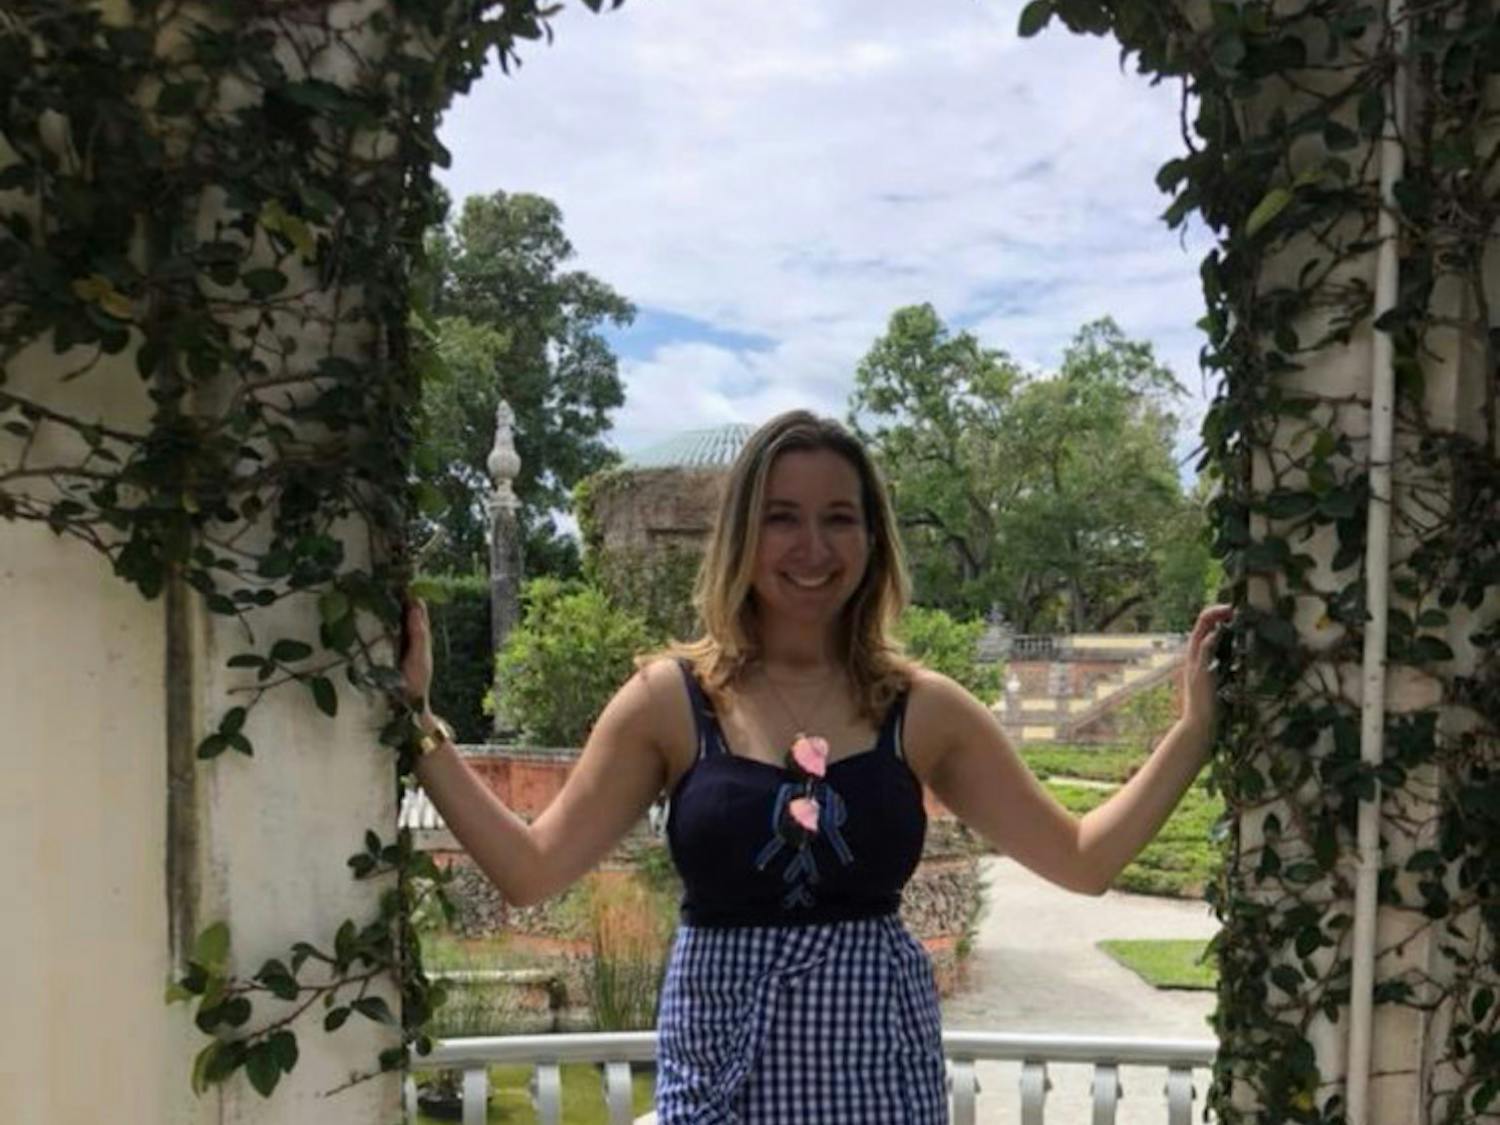 Sophia Visent, a 22-year-old UF environmental management senior, died by suicide last week. Her friends will hold a vigil to remember her 9 p.m. Wednesday on the Plaza of the Americas. A GoFundMe page is raising money for funeral expenses.